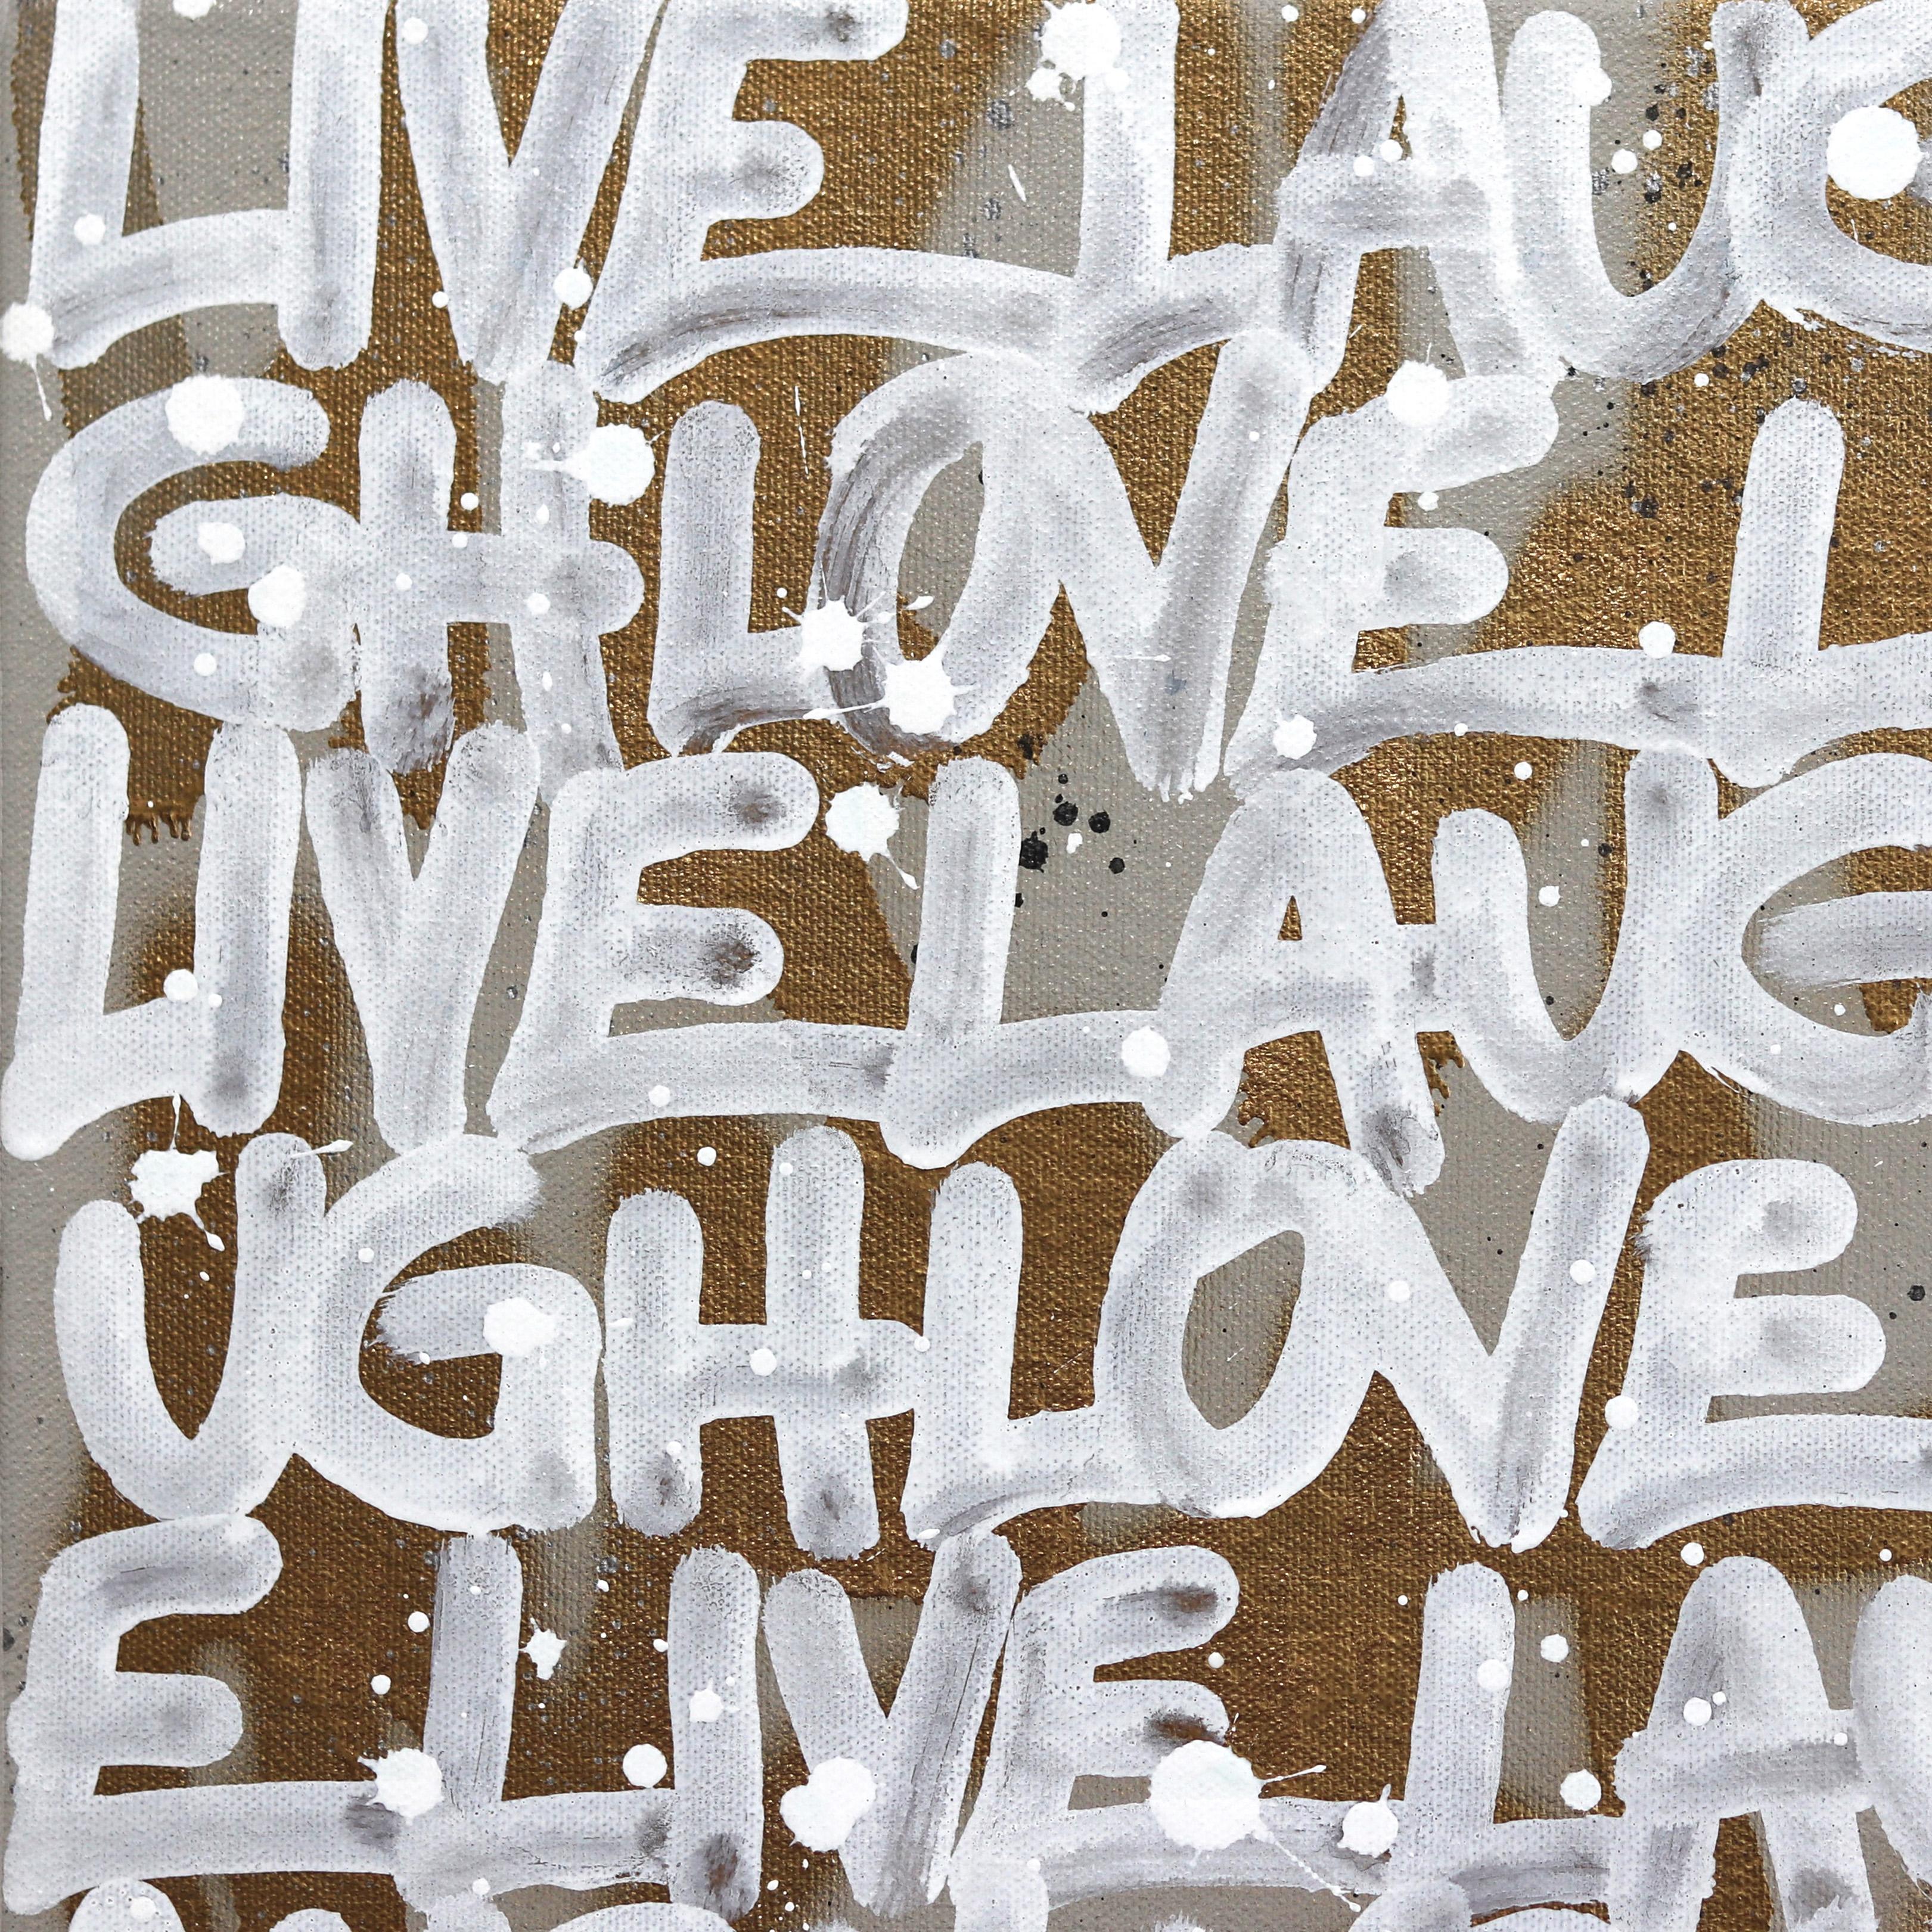 Live, Laugh, Love - Street Art Painting by Amber Goldhammer